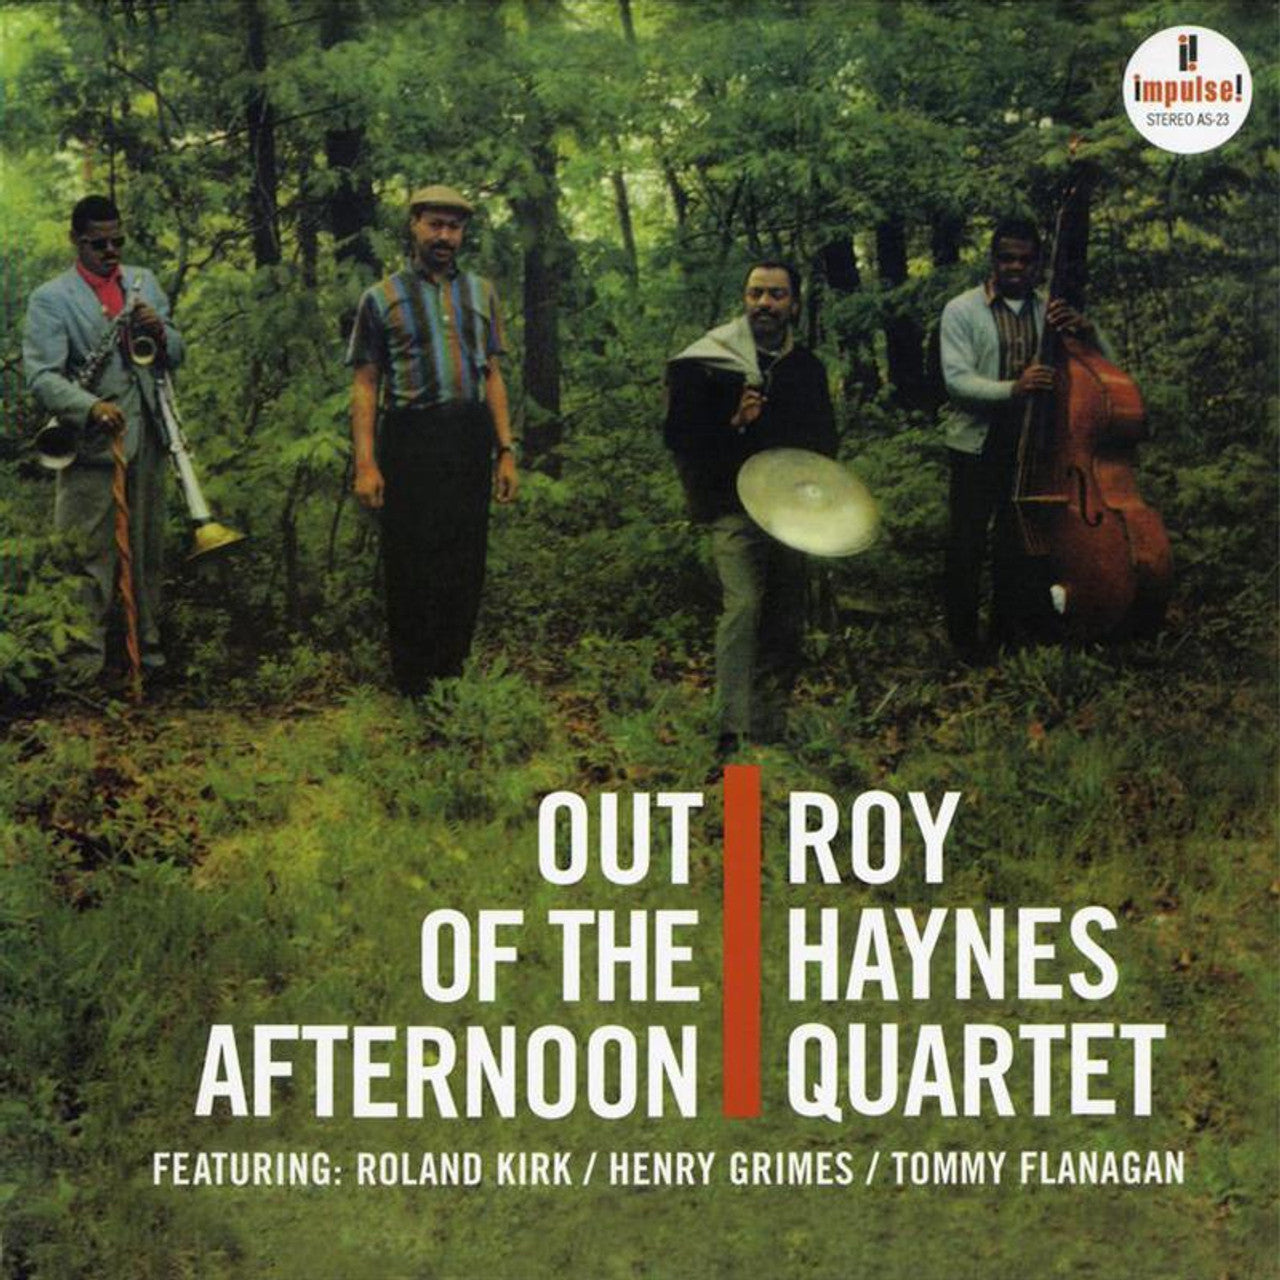 Haynes, Roy "Out Of The Afternoon" [Verve Acoustic Sounds Series]